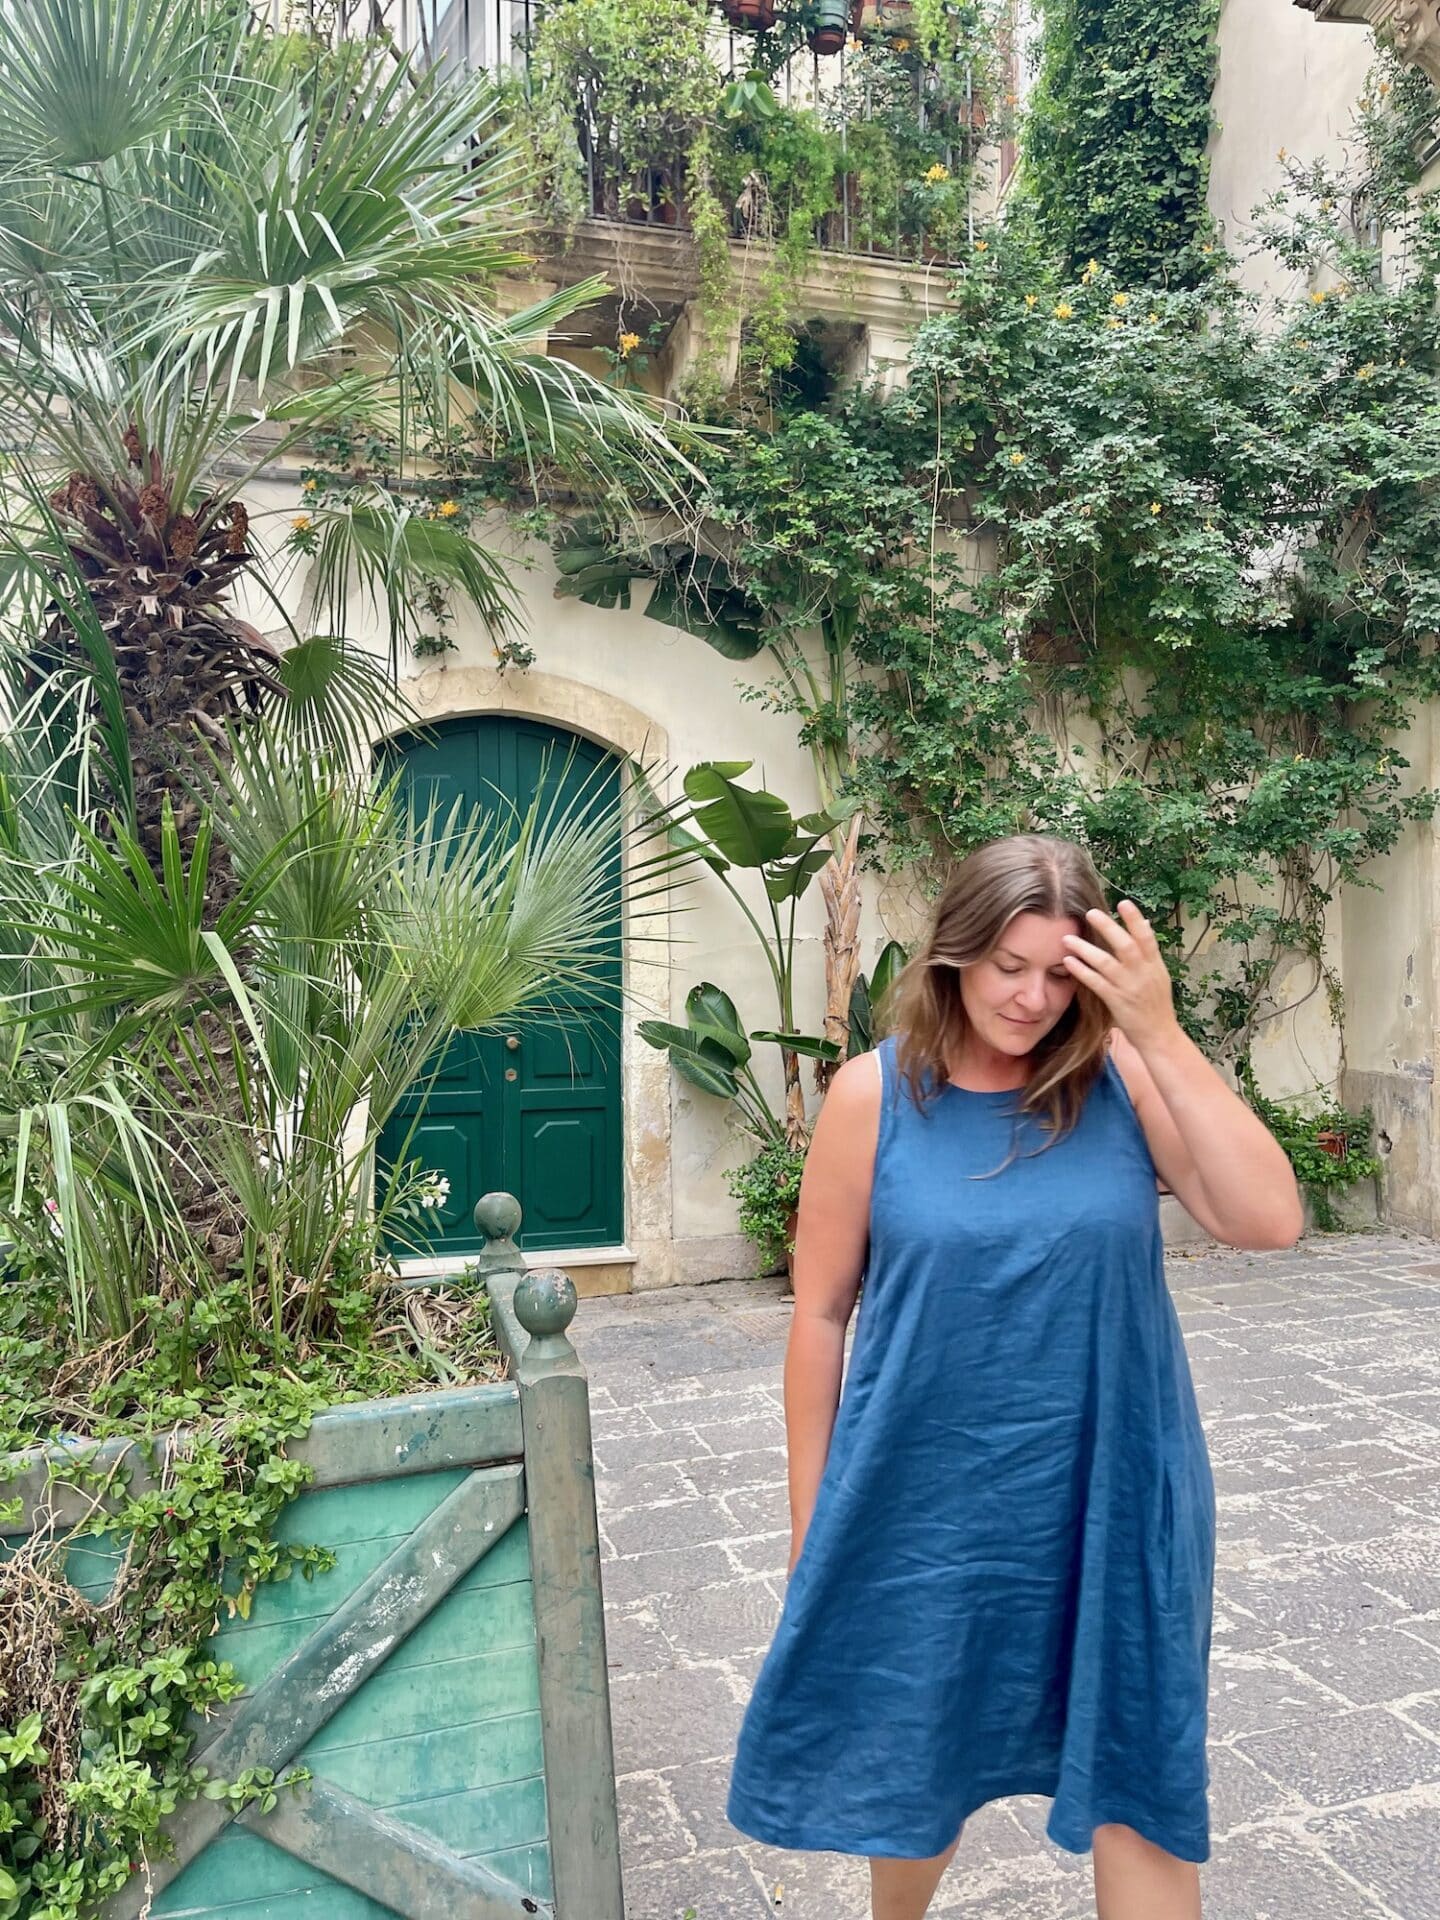 A solo woman in a blue dress stands in front of a green door surrounded by lush greenery in Bari, Italy. She is looking down and touching her hair, with a serene expression on her face.